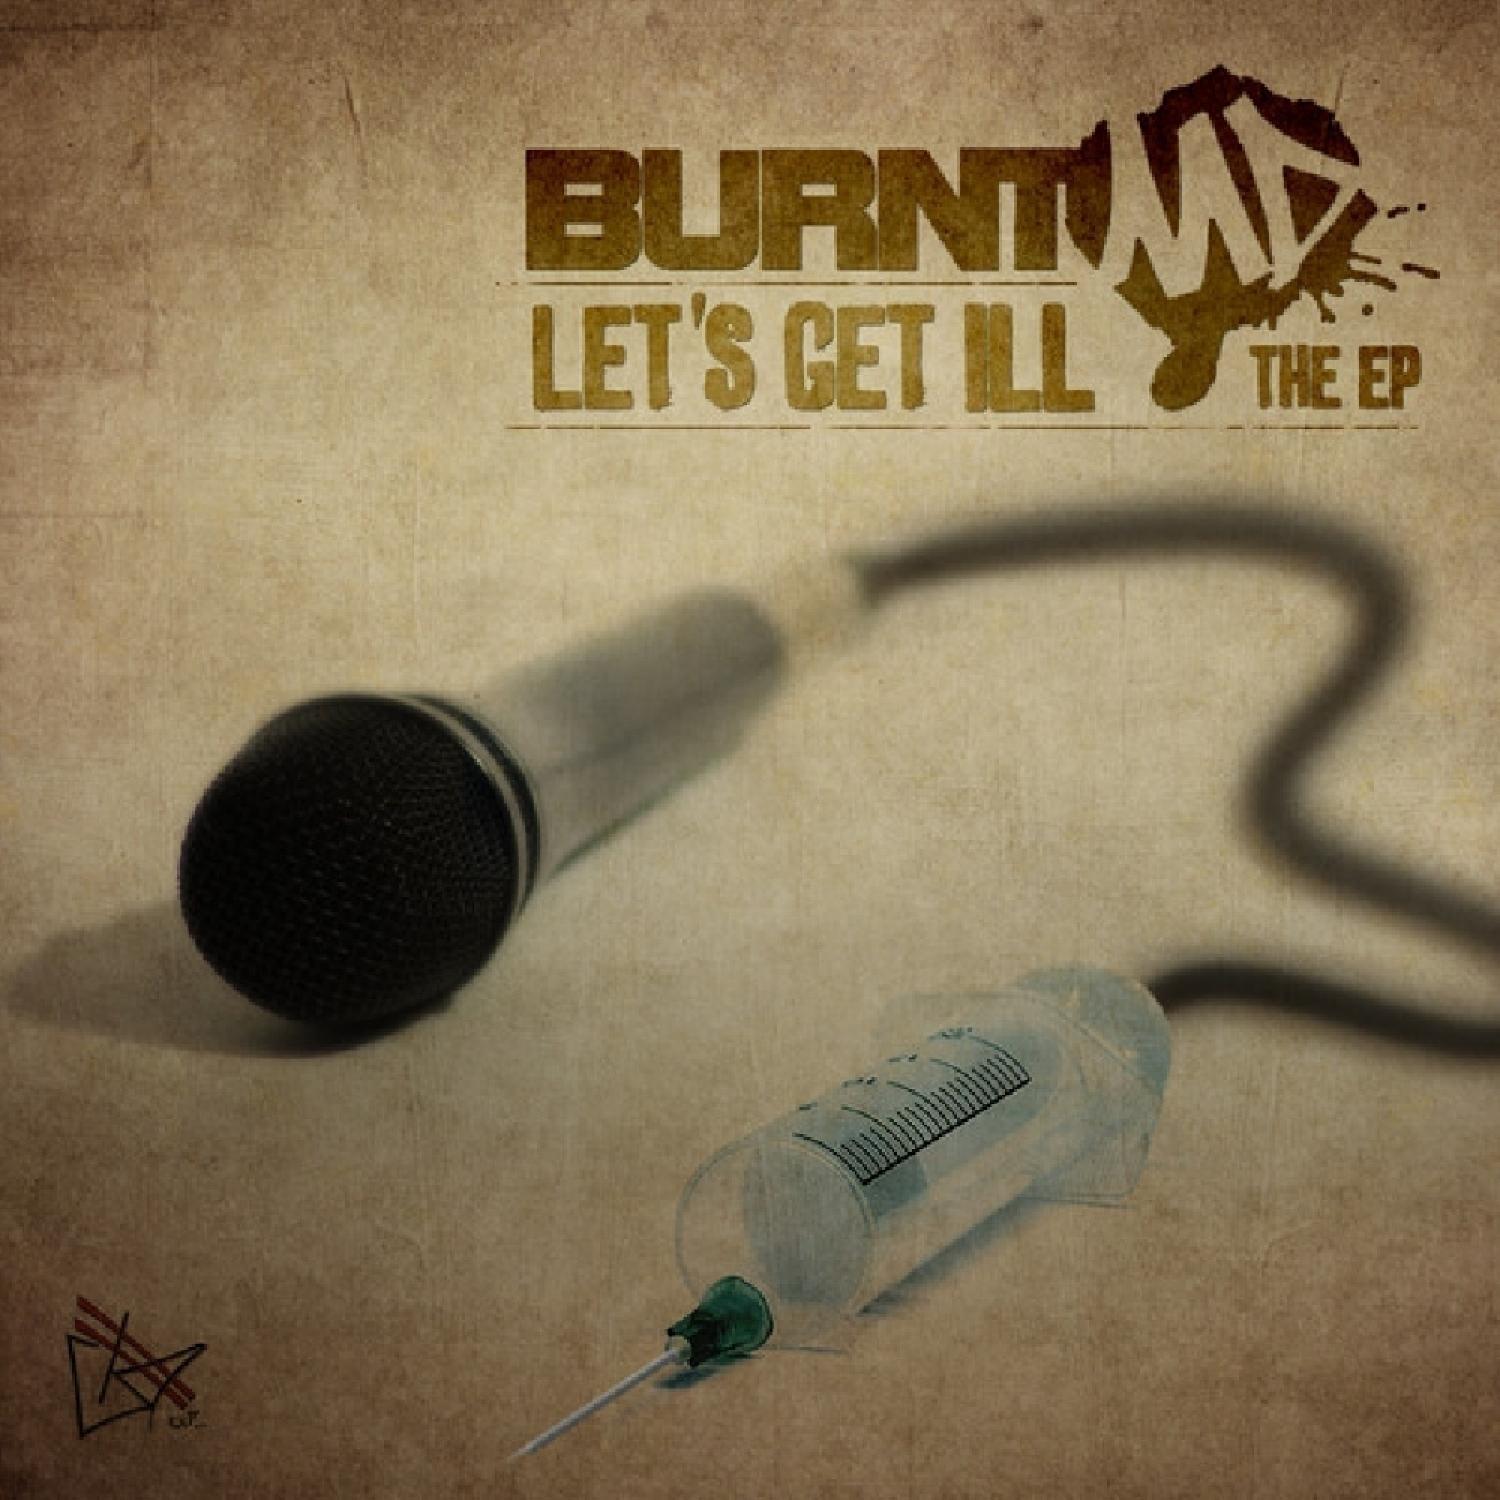 Let's Get Ill (EP)